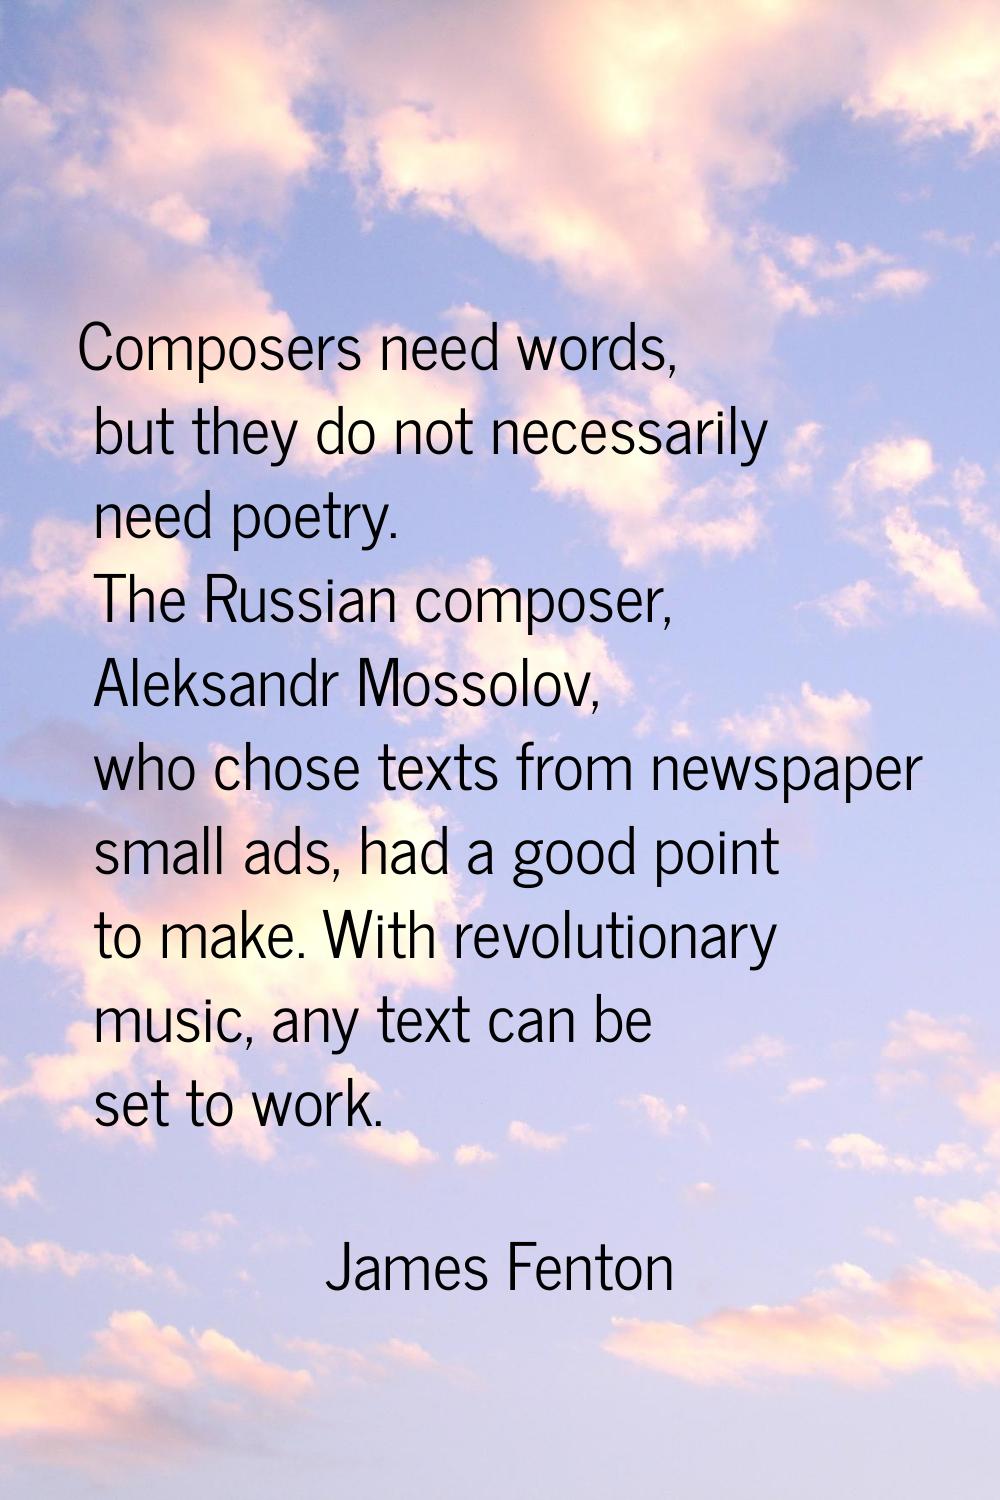 Composers need words, but they do not necessarily need poetry. The Russian composer, Aleksandr Moss